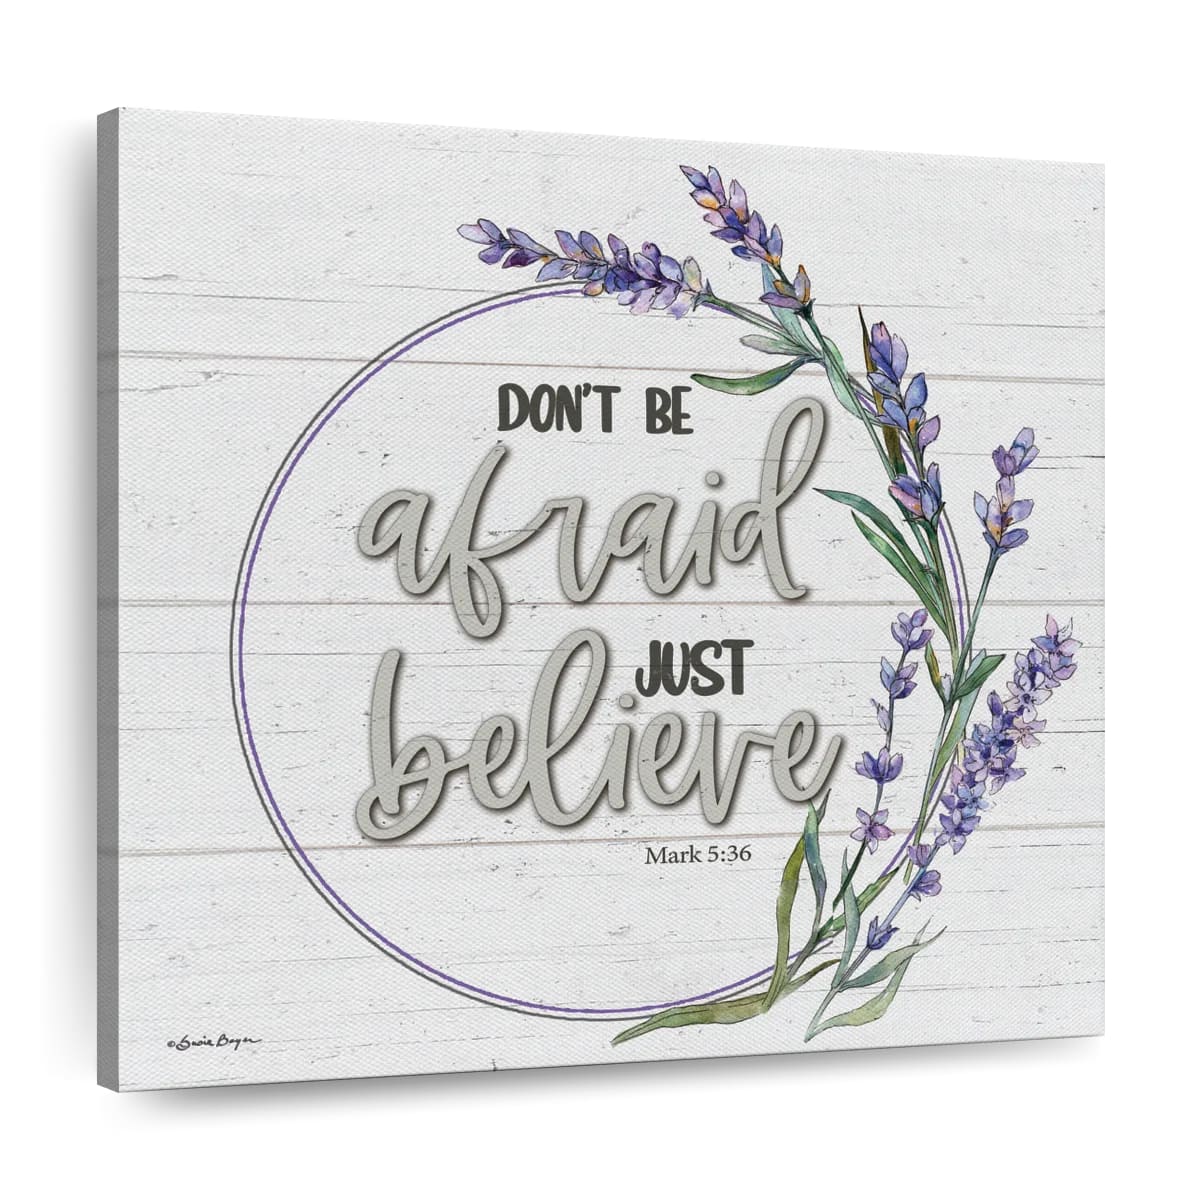 Don't Be Afraid Square Canvas Wall Art - Bible Verse Wall Art Canvas - Religious Wall Hanging